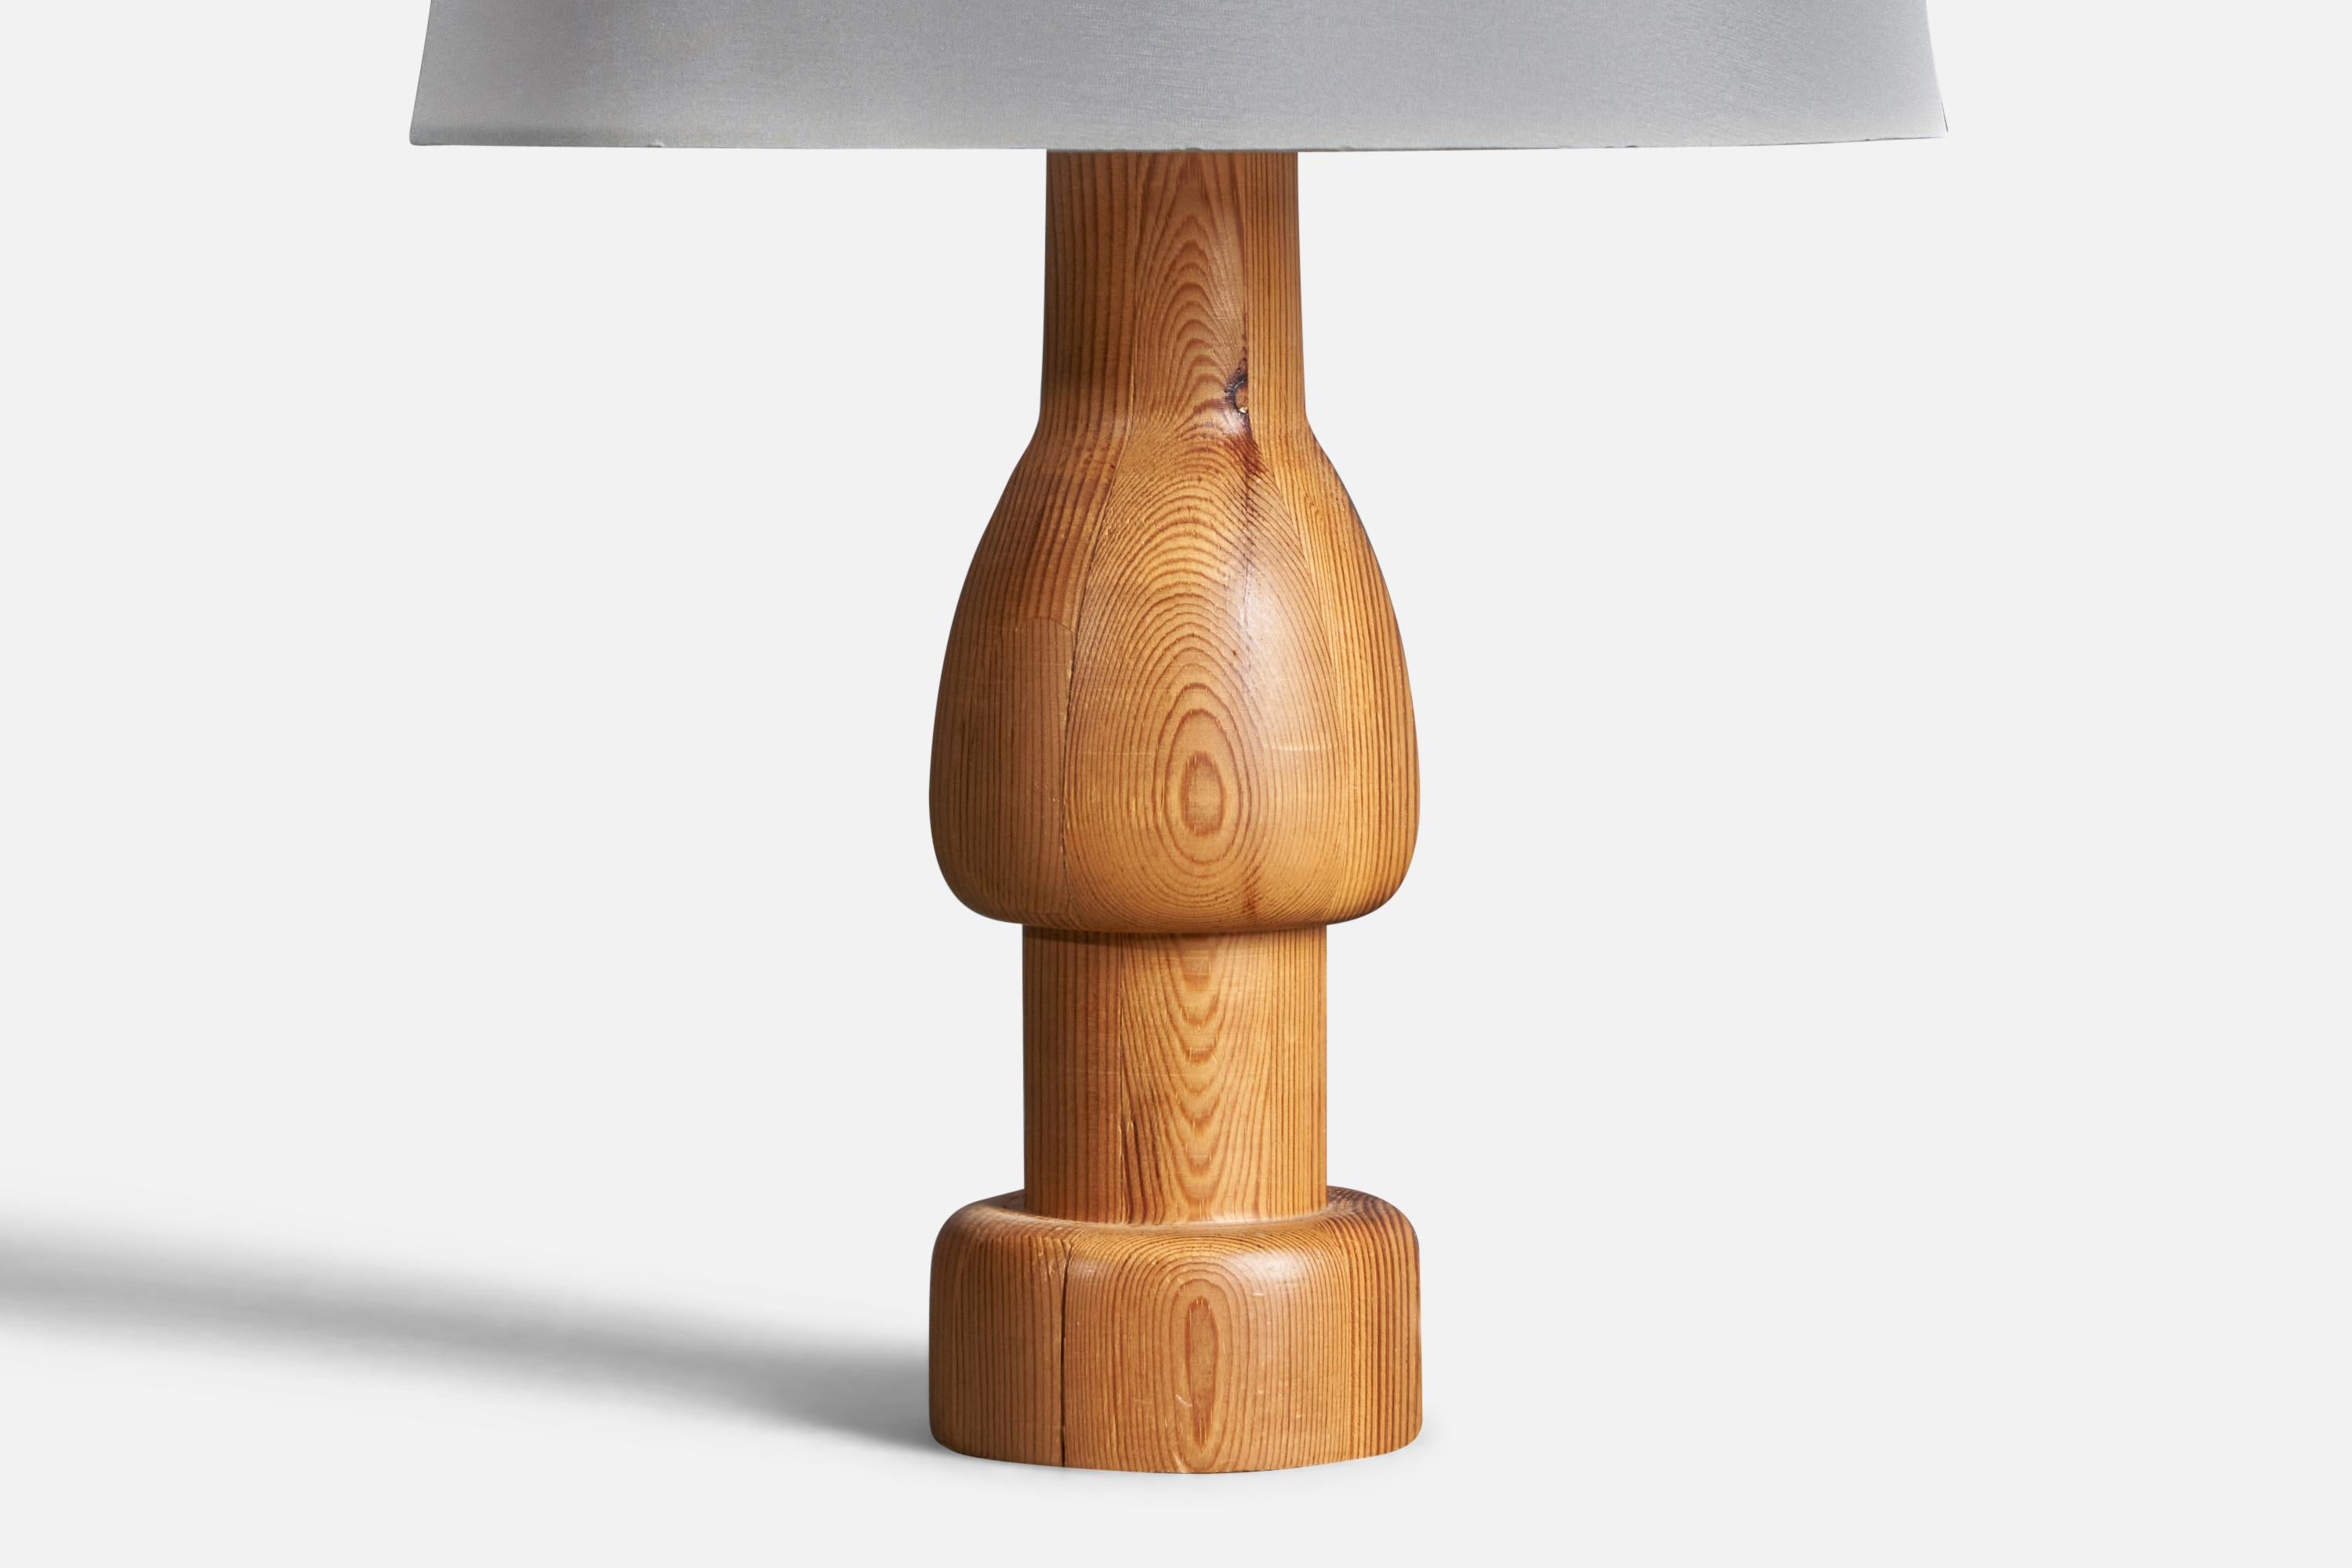 A sculptural table lamp. Designed and produced in Sweden, 1970s. Features solid turned pine. Has retained light patina over time.

Condition: Good

Wear consistent with age and use.

Dimensions of Lamp (inches):11” H x 3.25” Diameter

Dimensions of